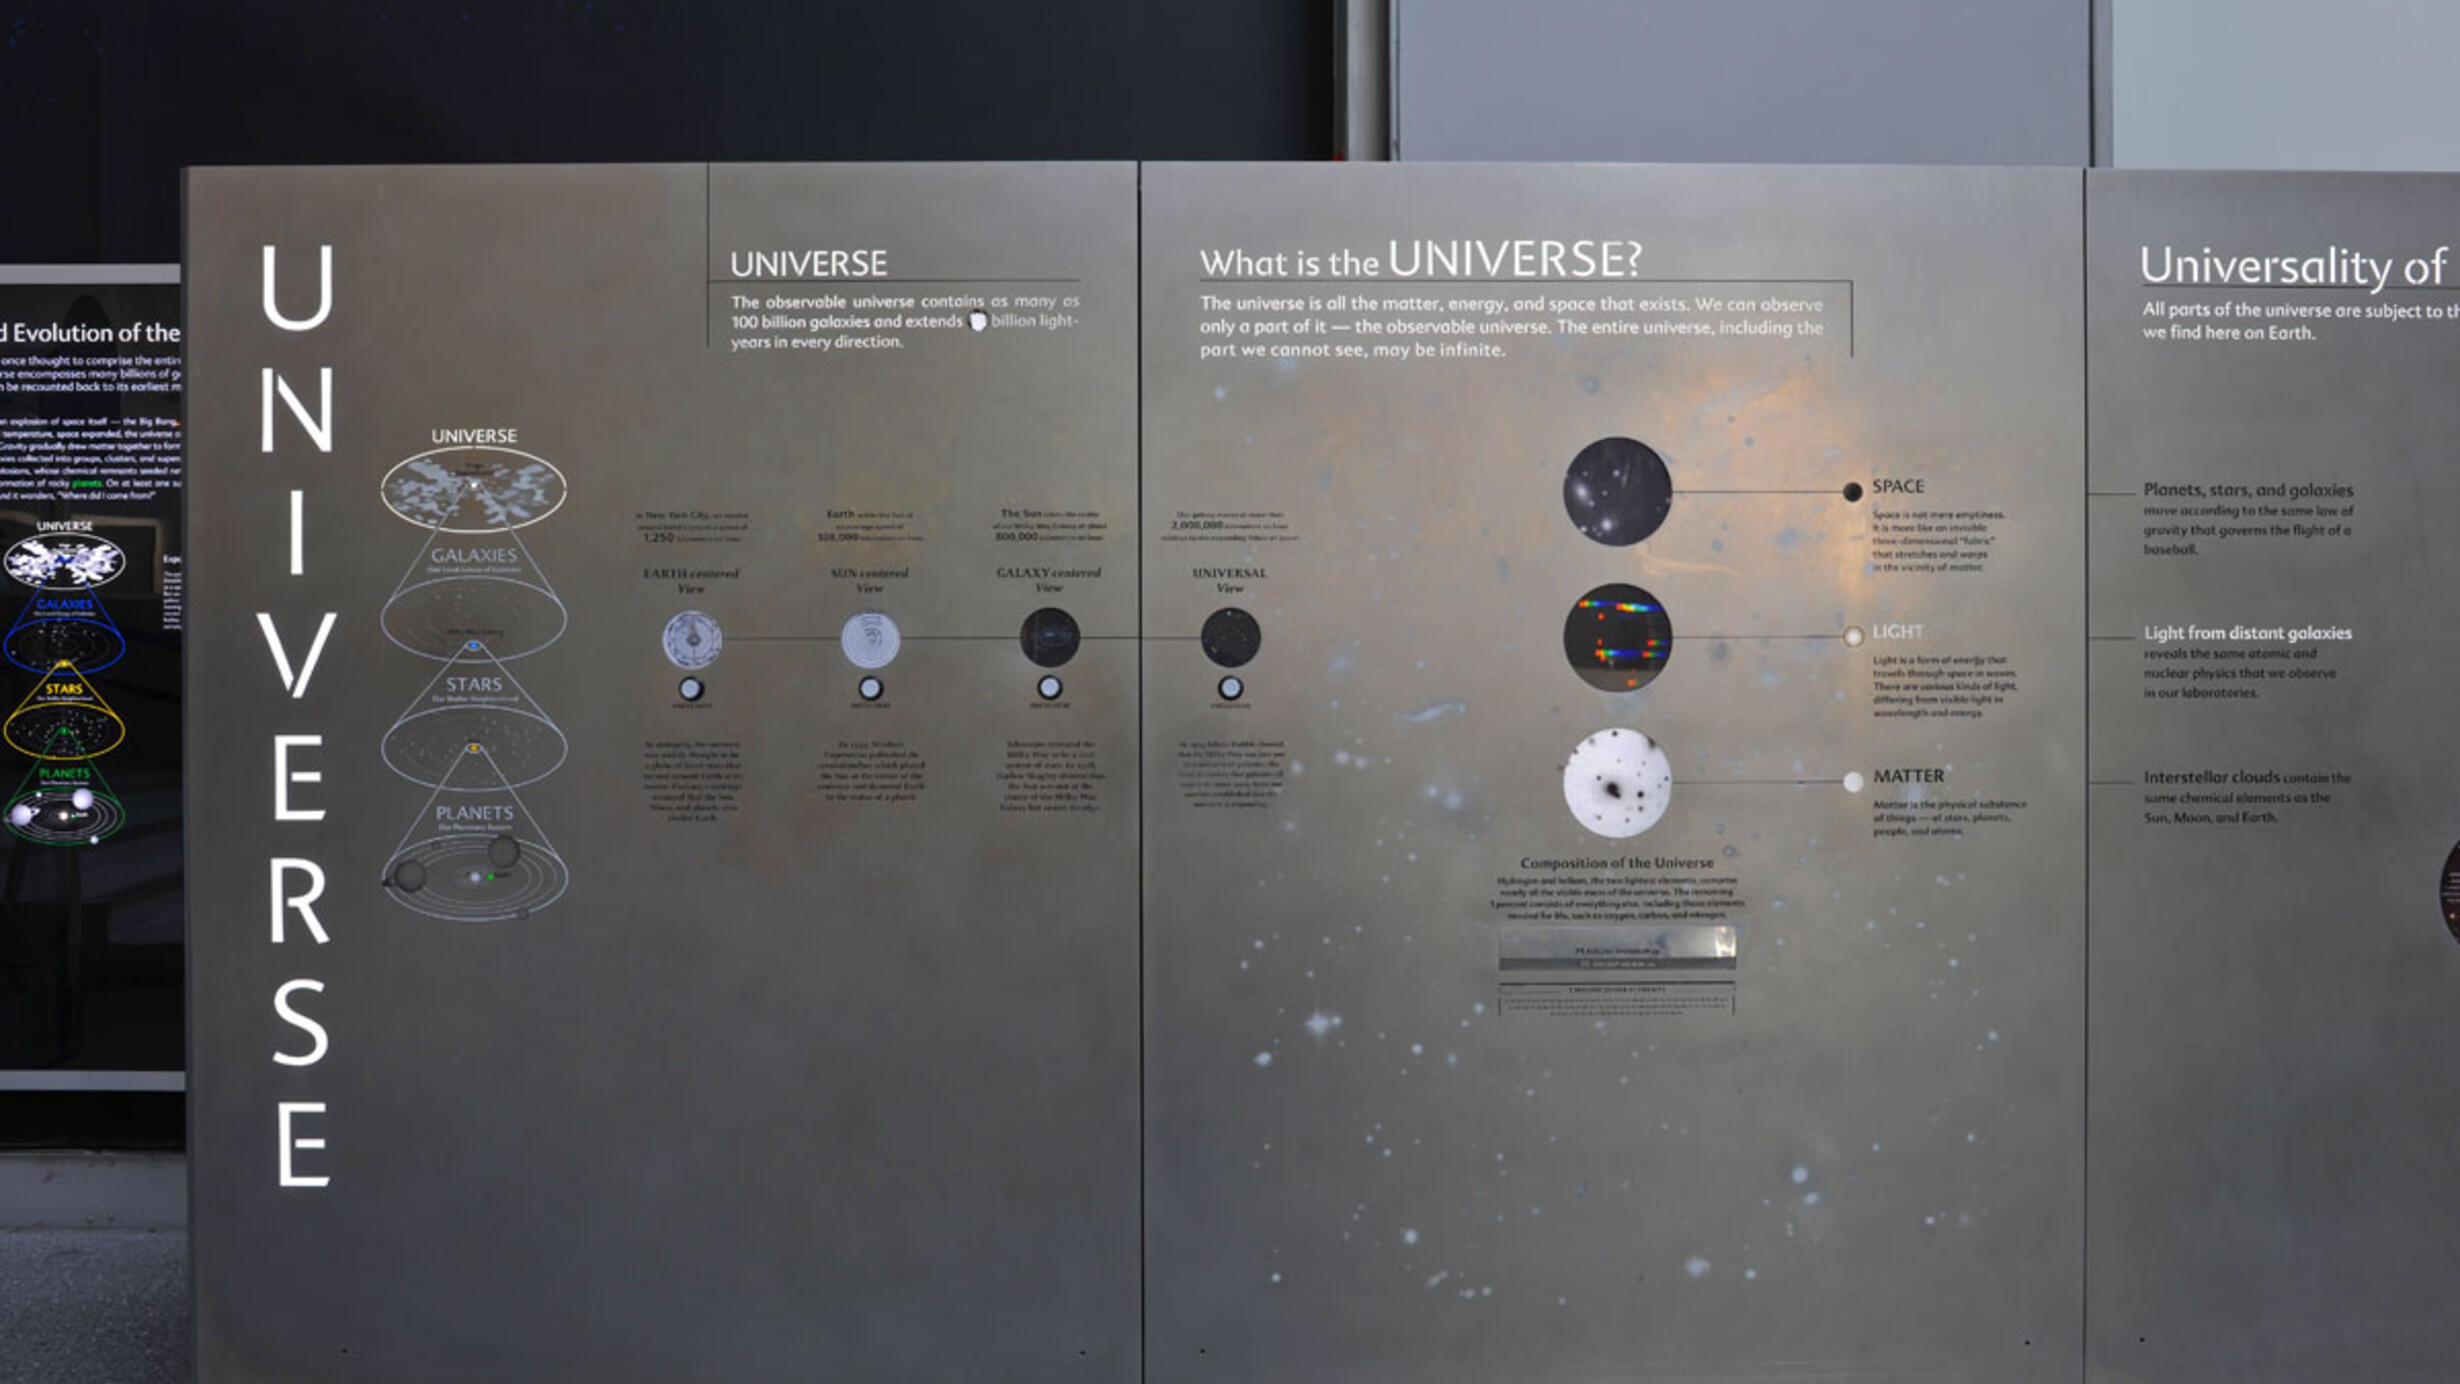 Universe and What is the Universe